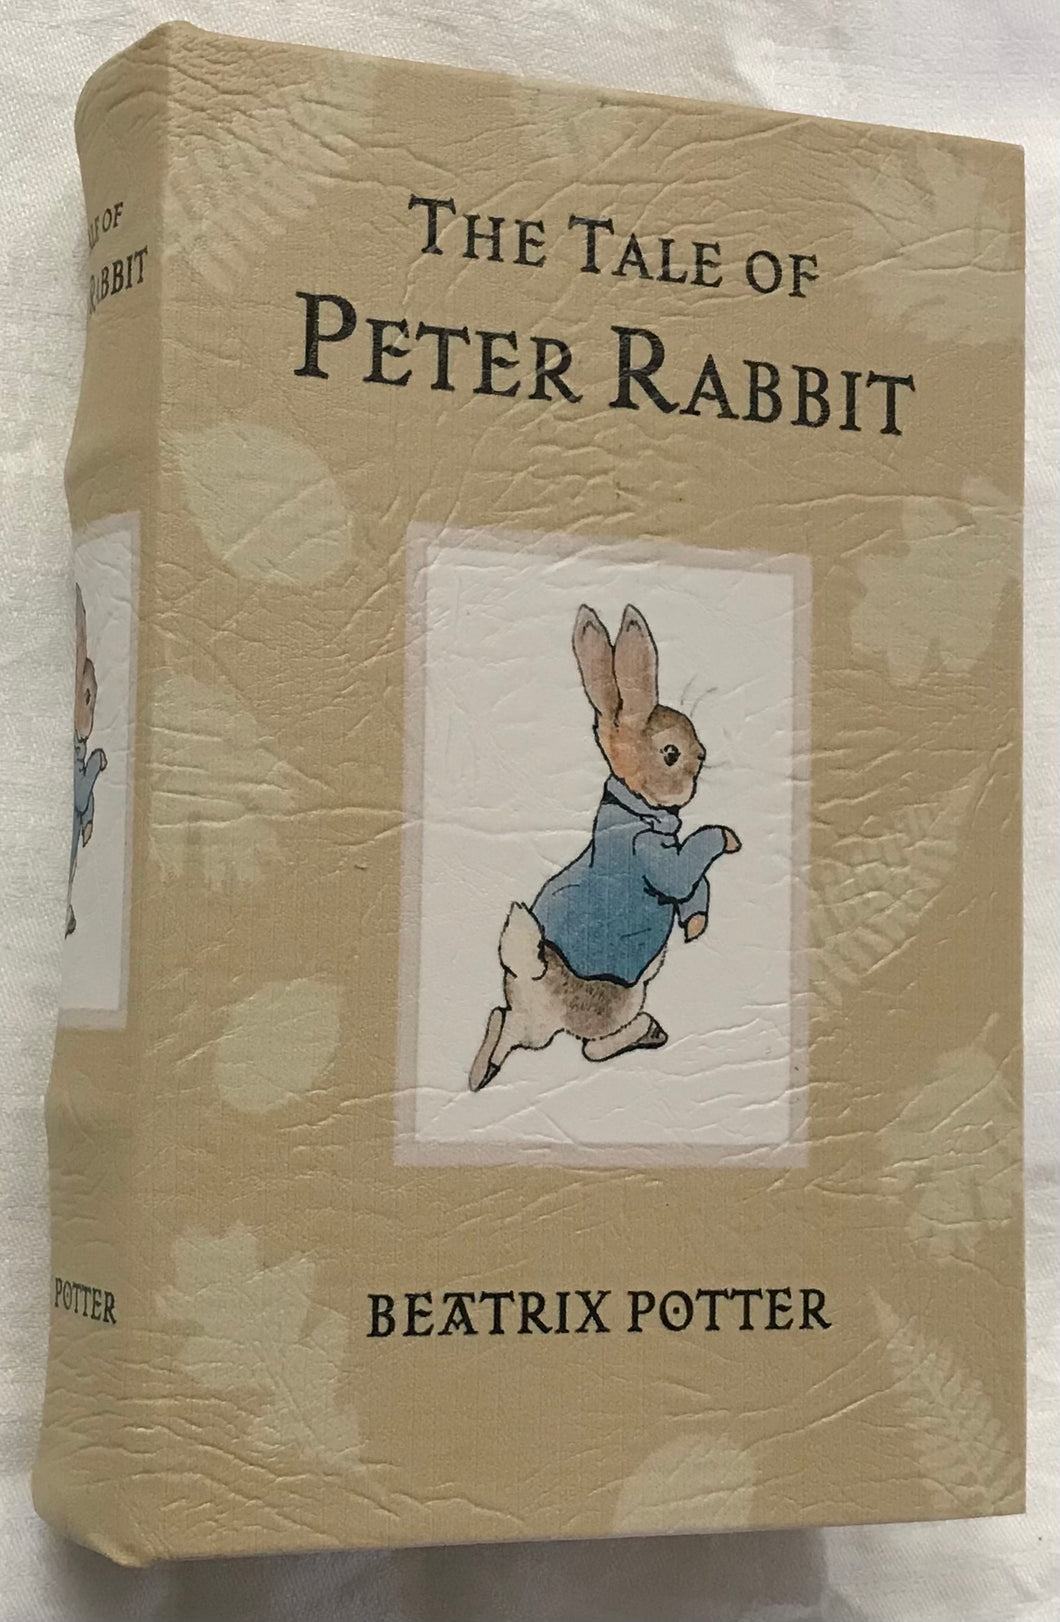 Book Box The Tale of Peter Rabbit 21x13x5cm